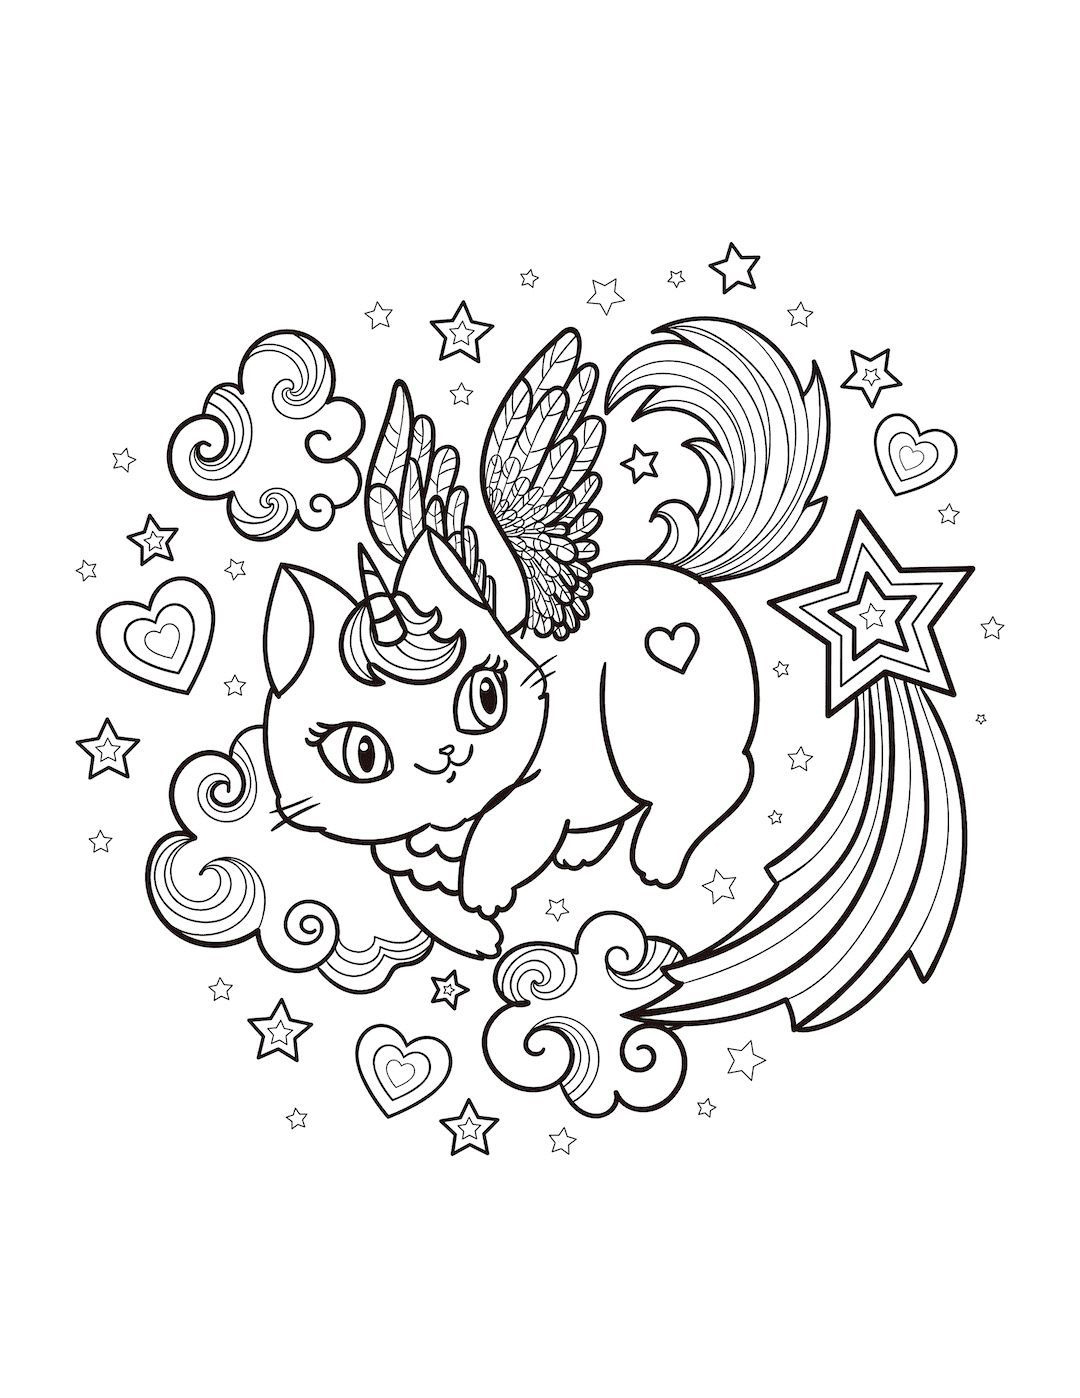 Caticorn flying Coloring Pages - Cat Coloring Pages - Coloring Pages